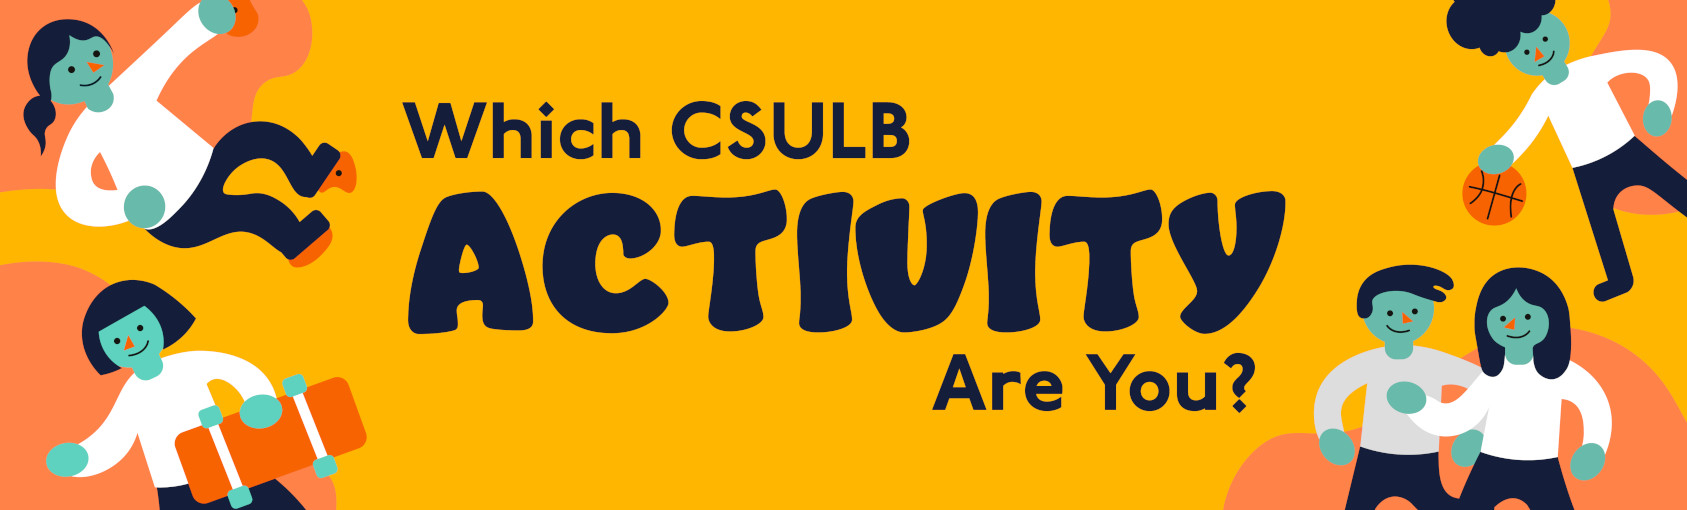 Quiz: Which CSULB Activity Are You? banner